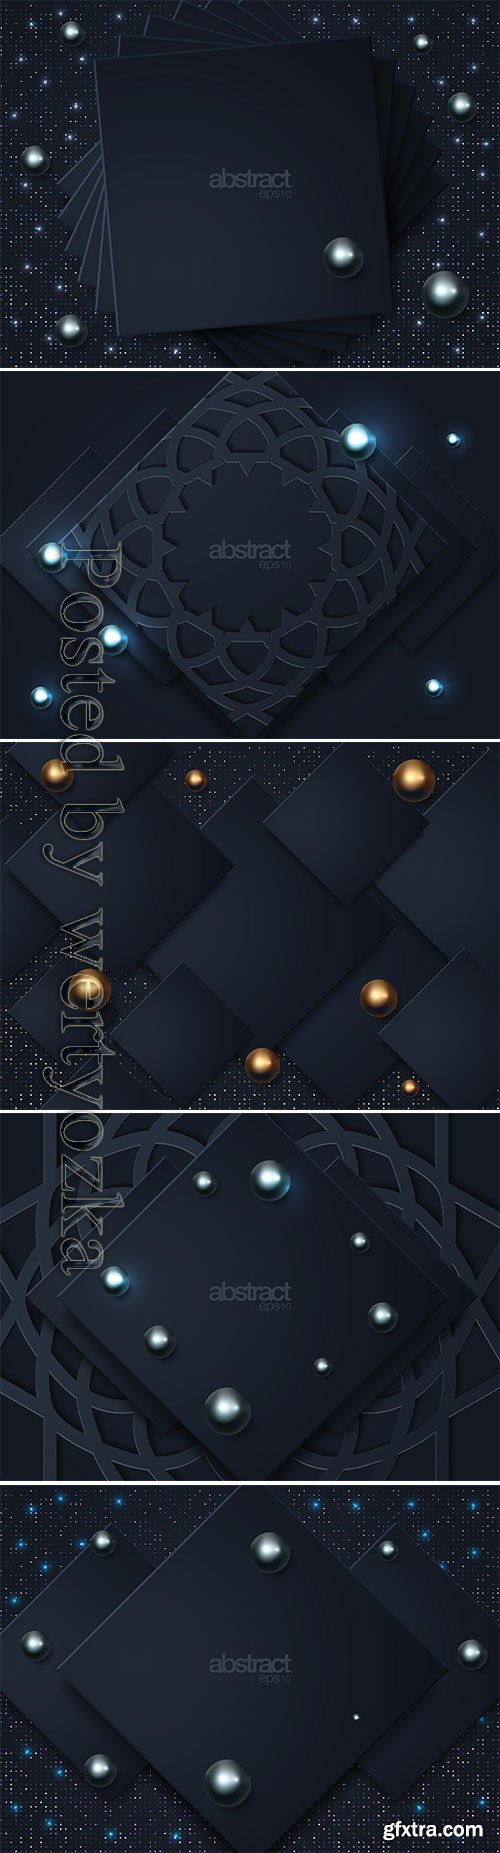 Abstract 3d background with pearls